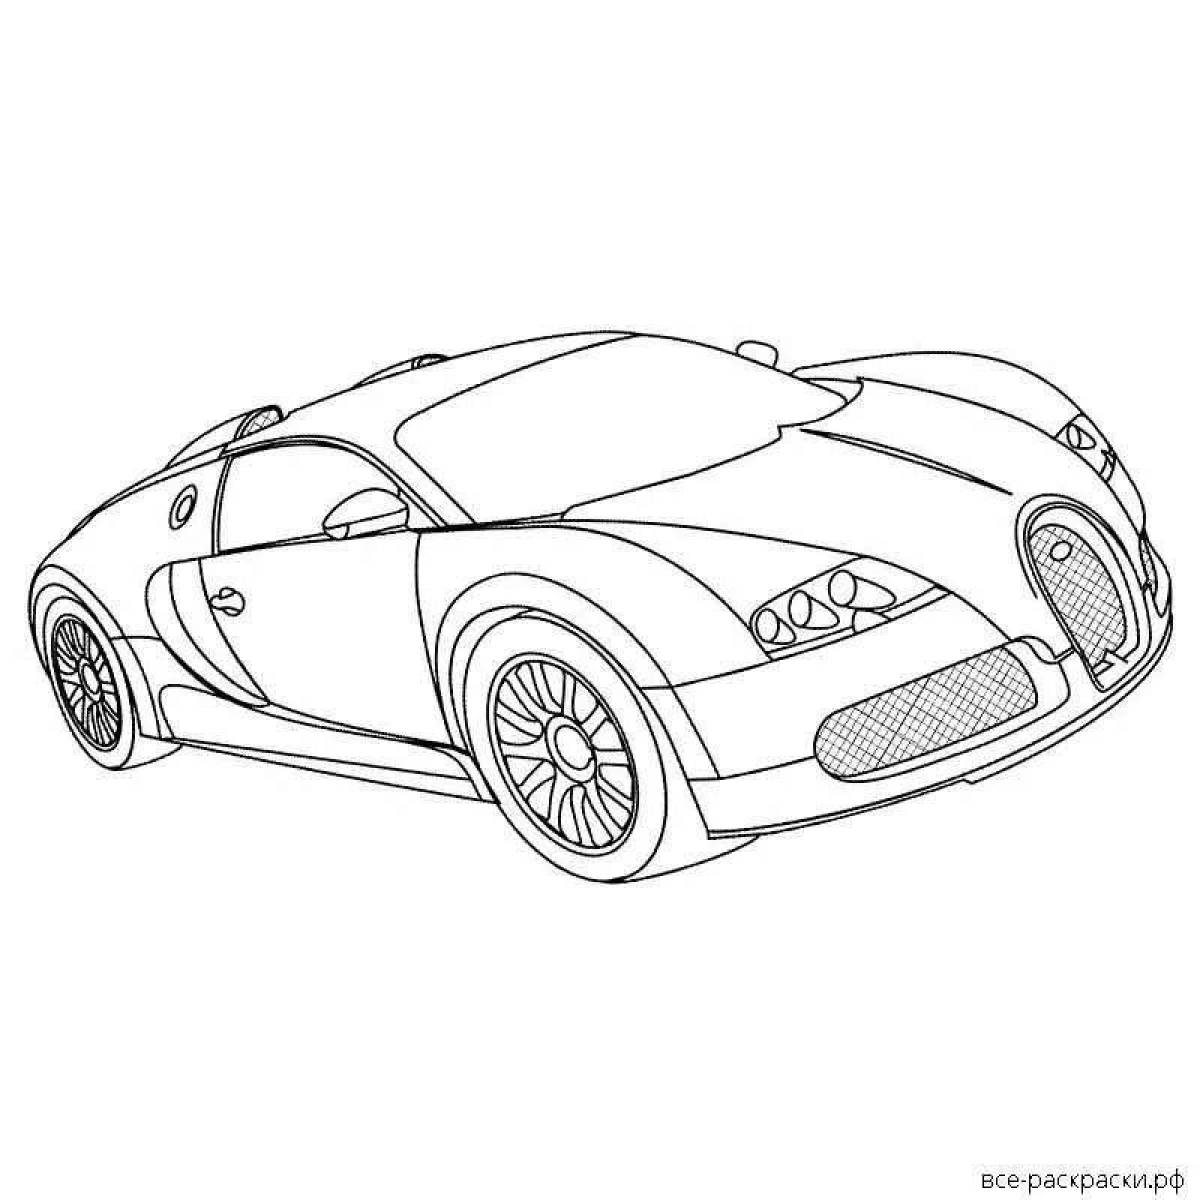 Bugatti chiron coloring pages